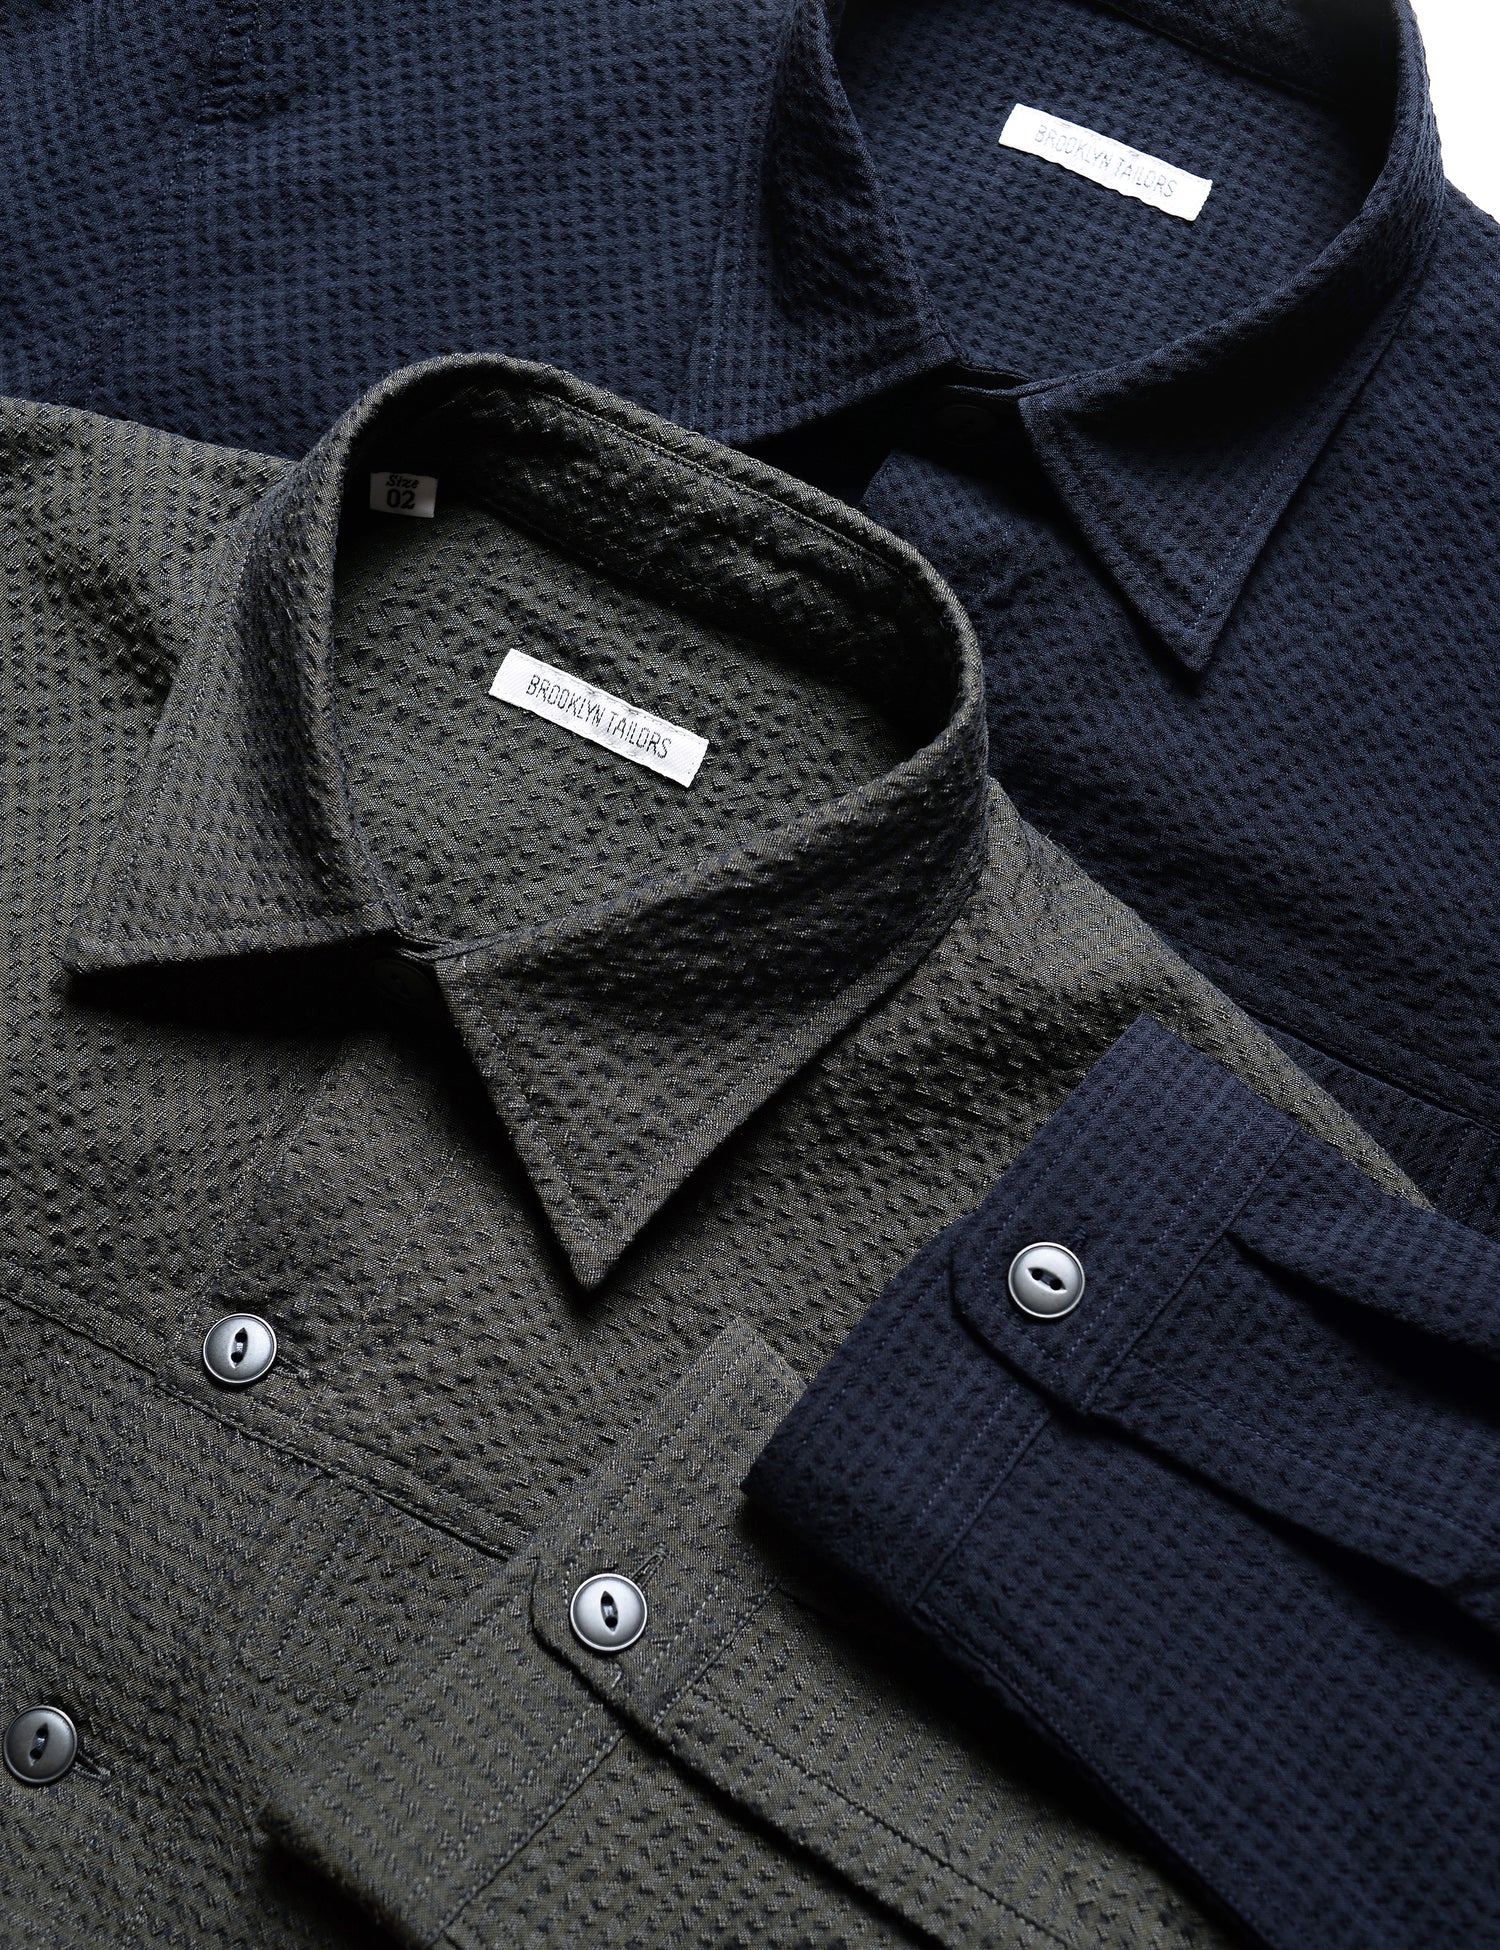 Detail shot of the collars and cuffs of two colors of Brooklyn Tailors BKT15 Shirt Jackets in Crinkled Wool & Cotton